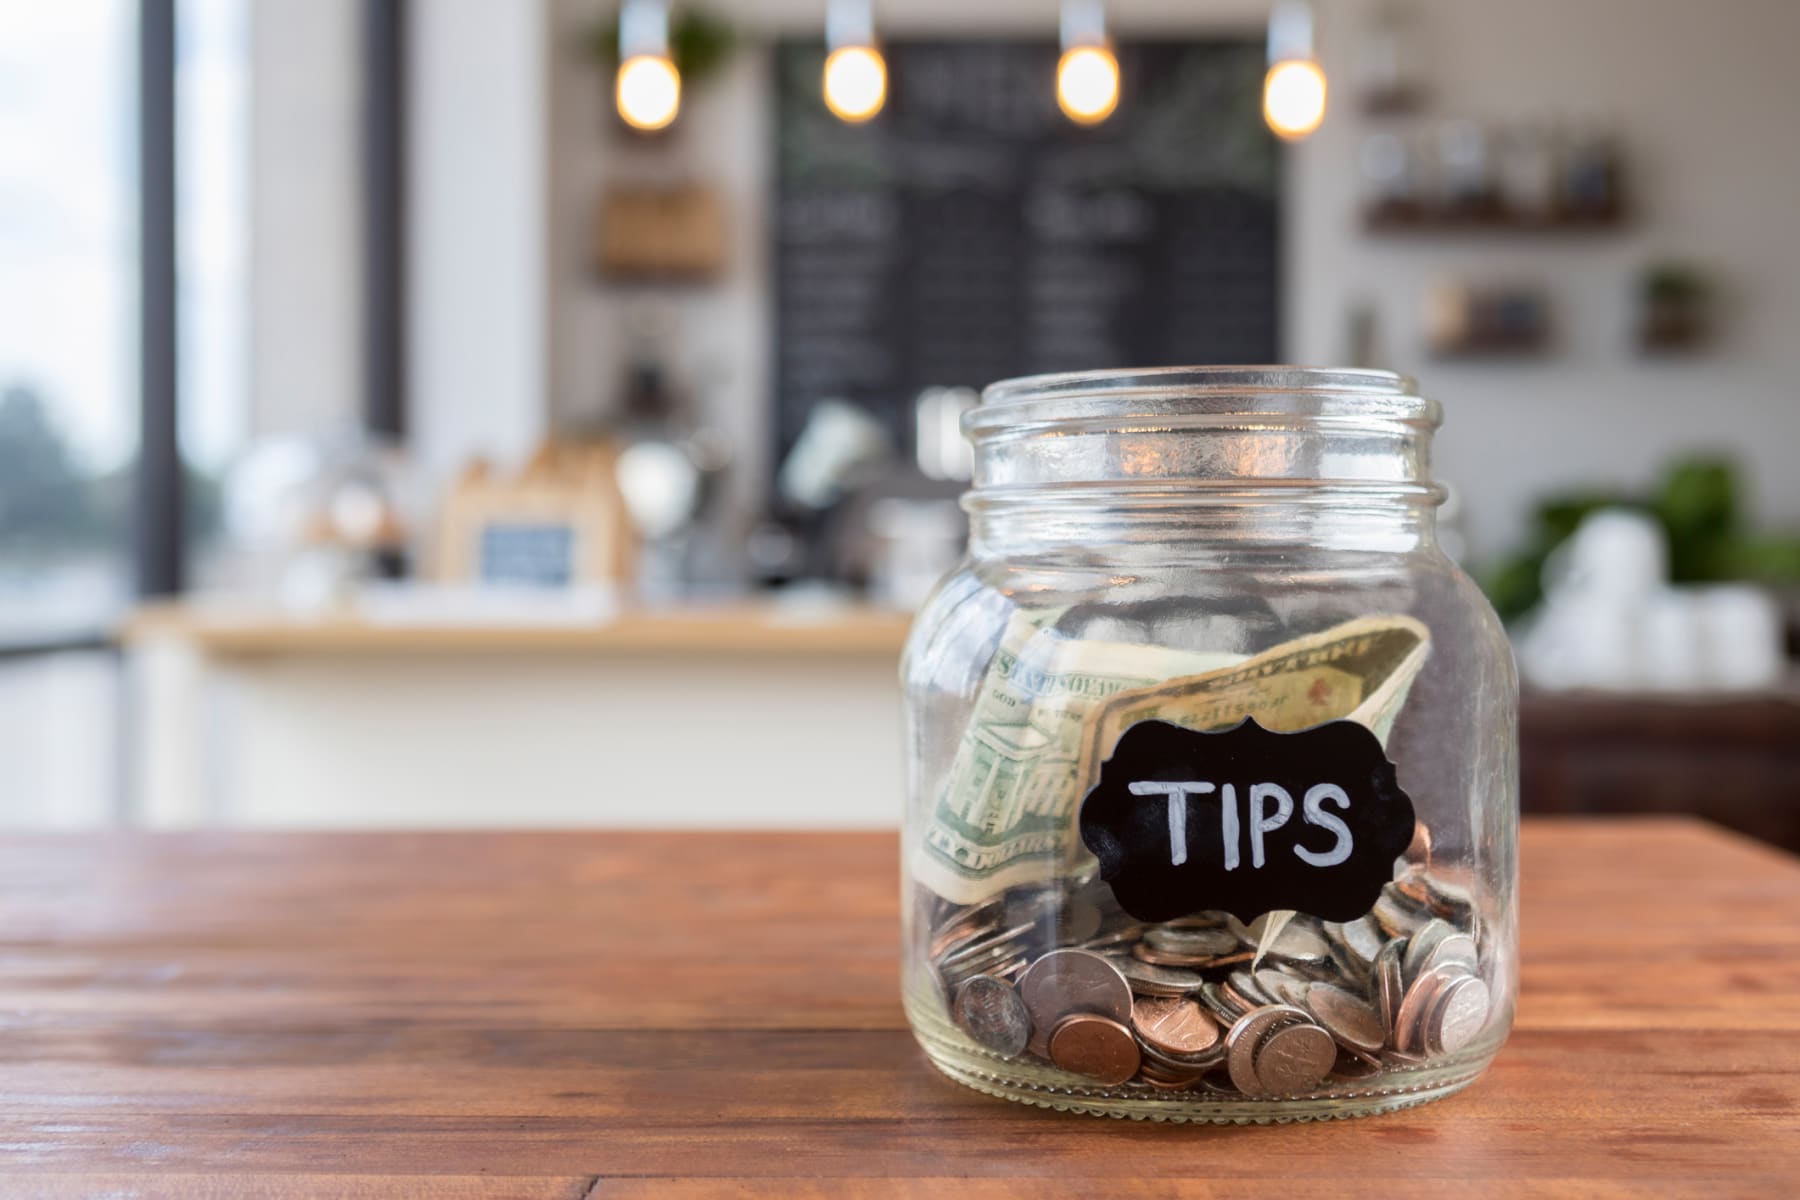 Tips jar on a cafe counter